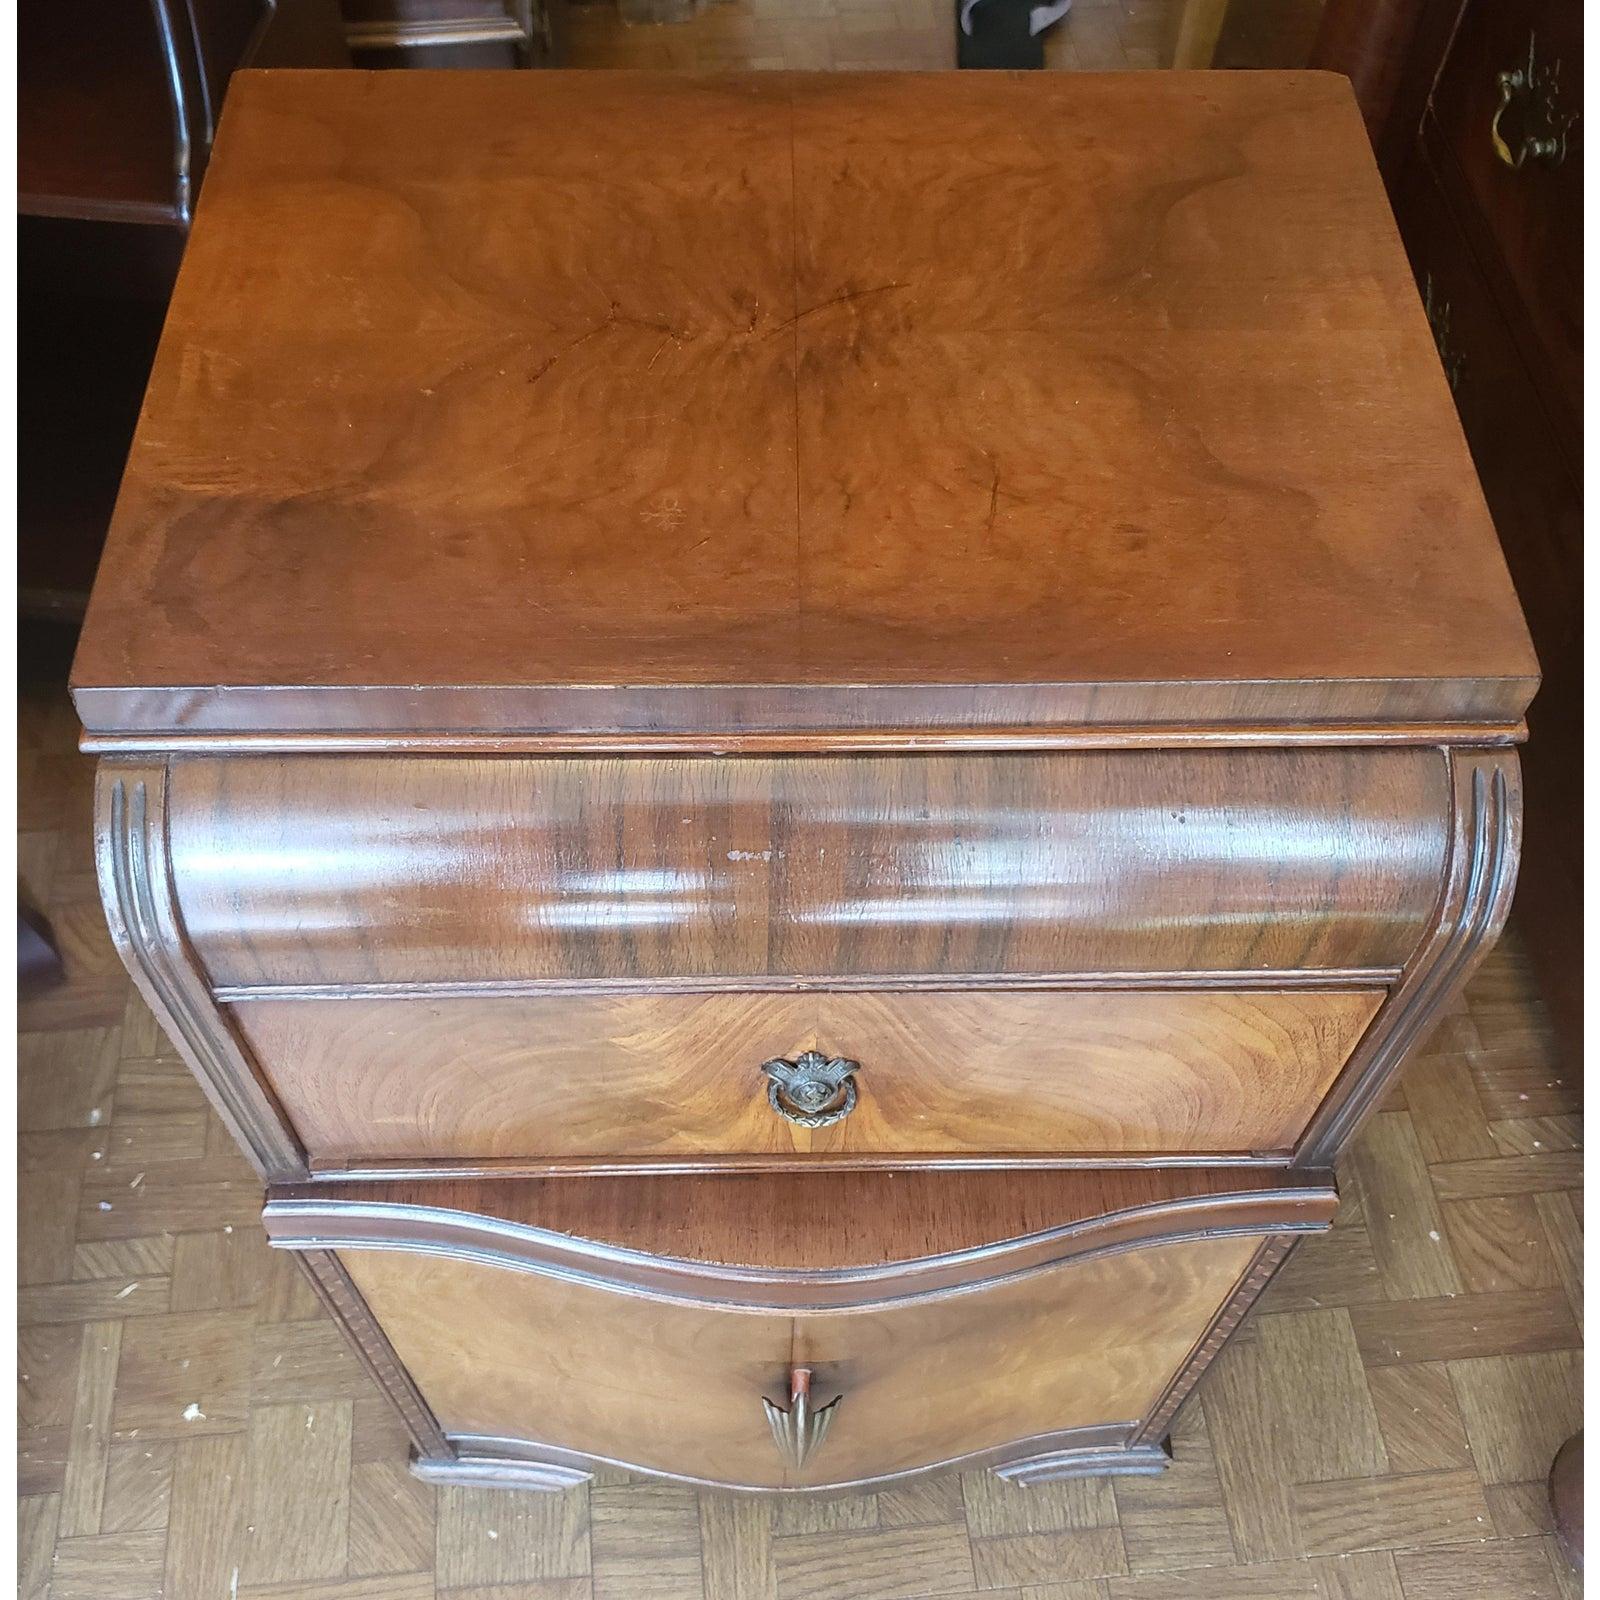 1930s Art Deco waterfall nightstand, end table or side table. It has a dark burl walnut front with two dovetail drawers that work as originally intended.
It measures 17 inches in width , 14 inches in depth and 27 inches tall.
It is in original